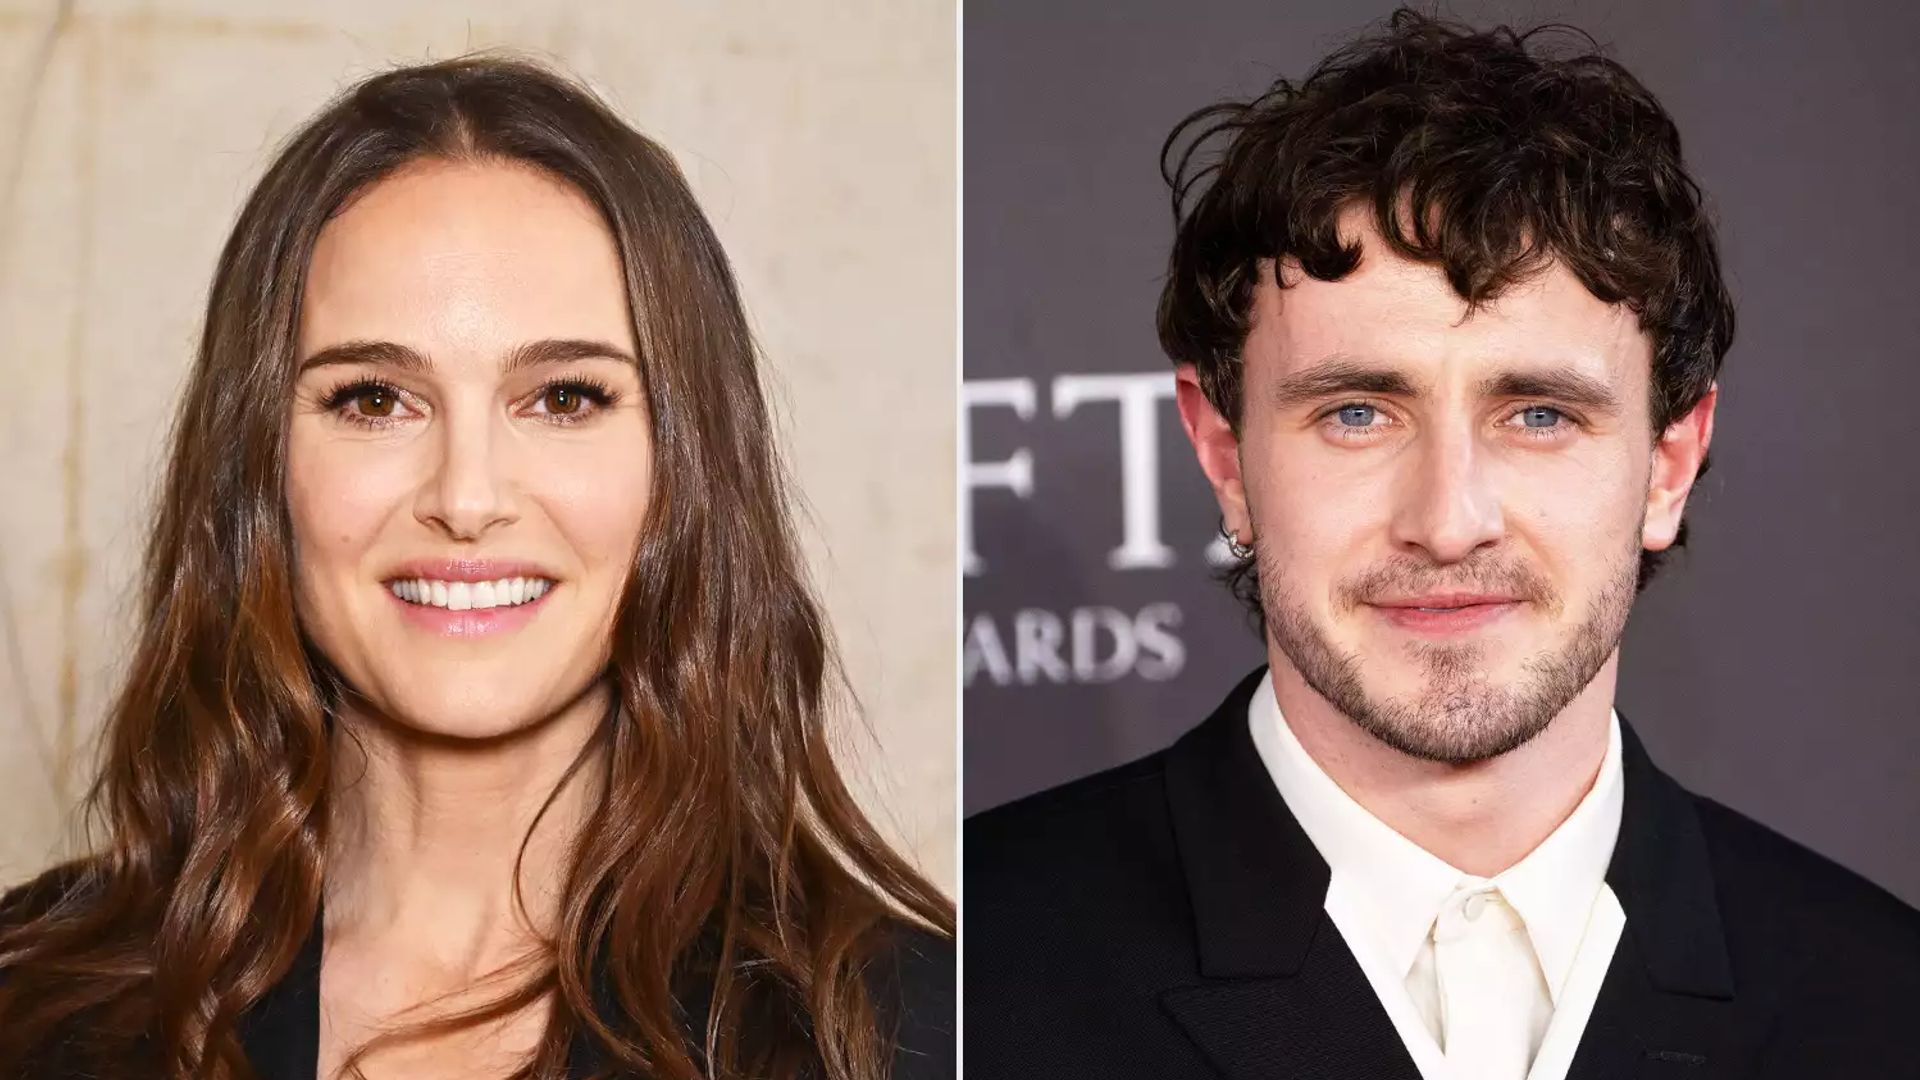 Inside Natalie Portman and Paul Mescal's relationship as star is seen radiating joy with actor